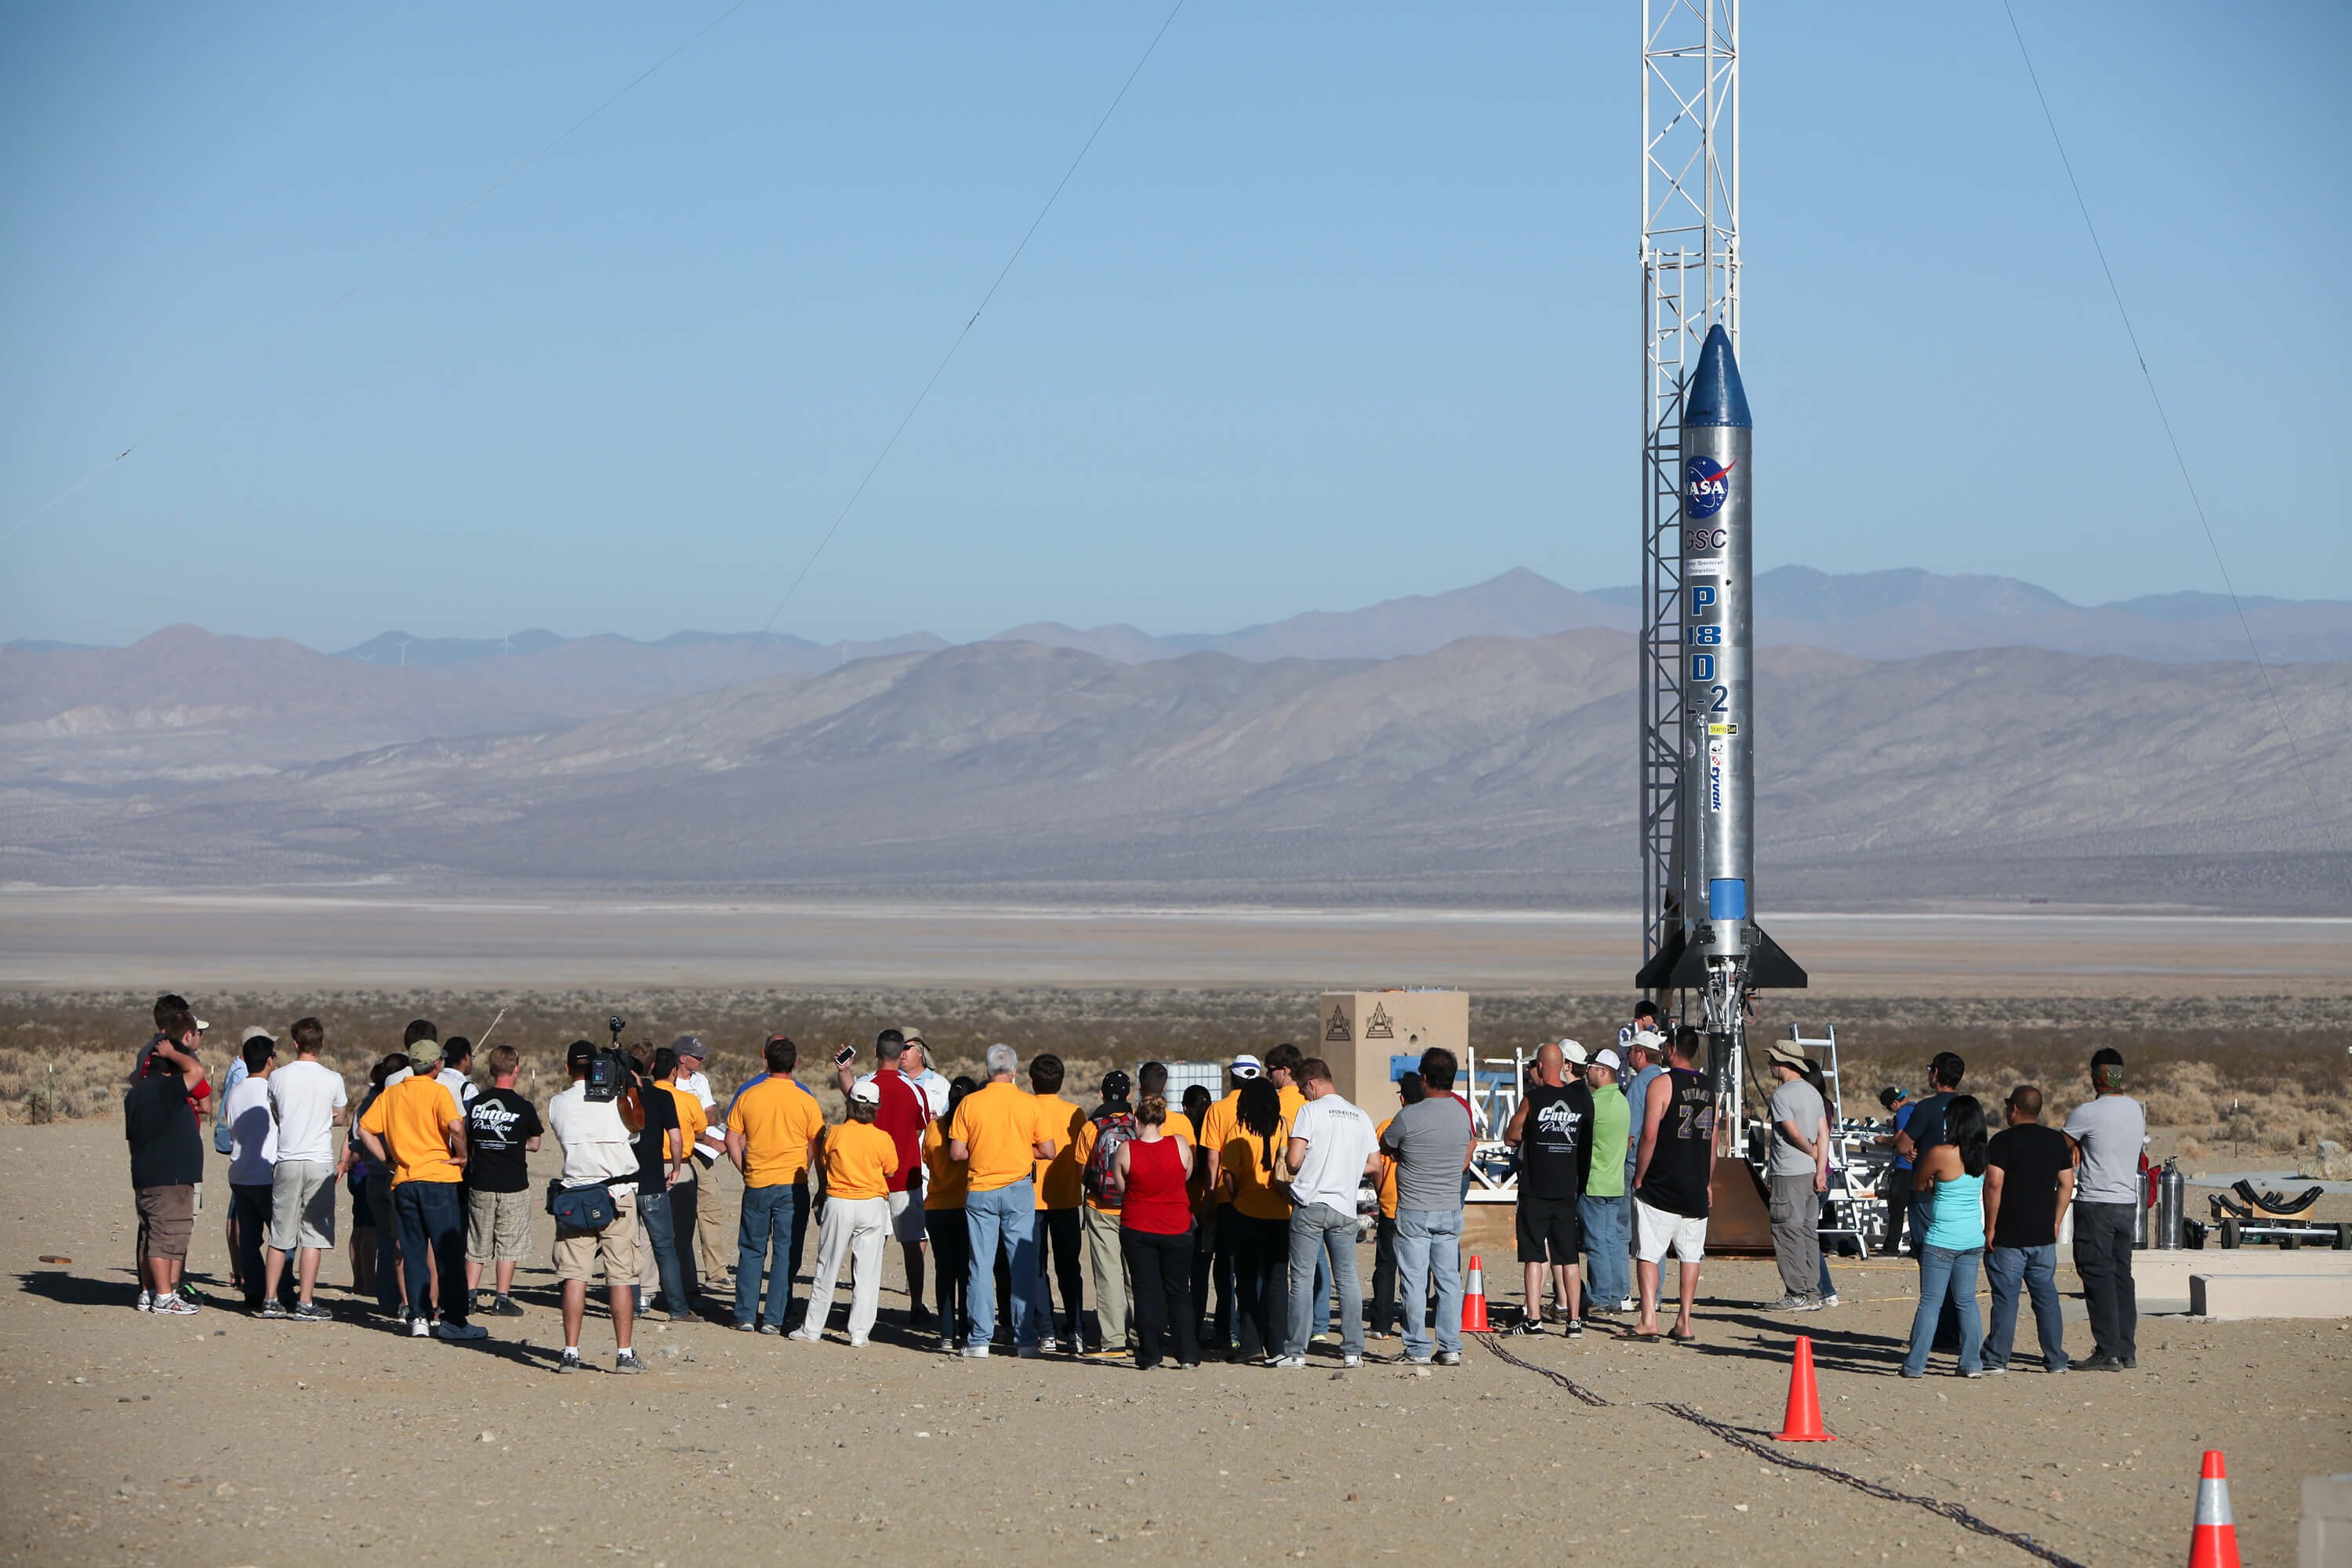 Students and engineers participate in the preparation for the launch of the Prospector 18 rocket Image Credit: NASA/Dimitri Gerondidakis